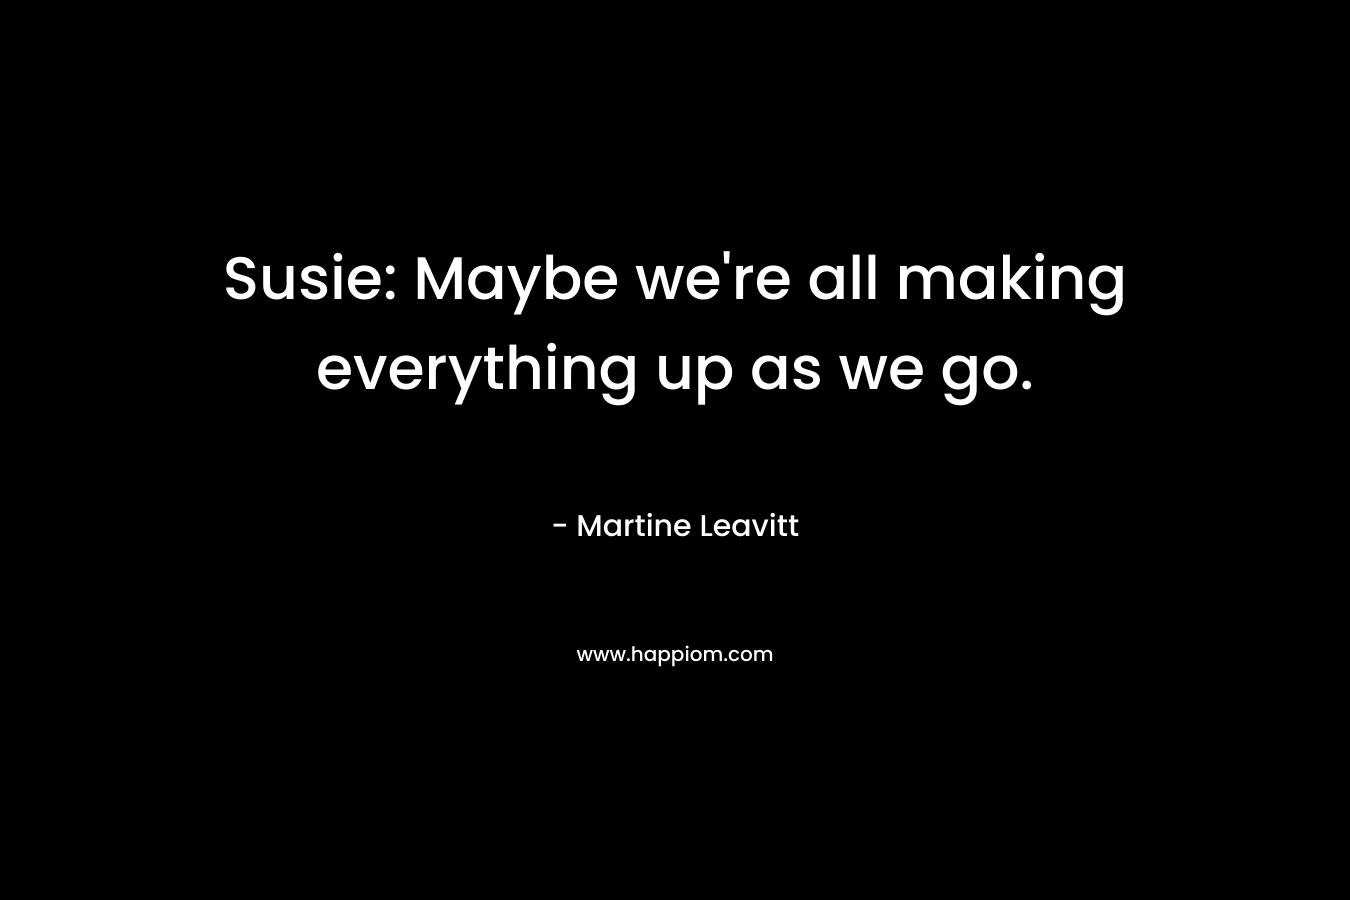 Susie: Maybe we're all making everything up as we go.